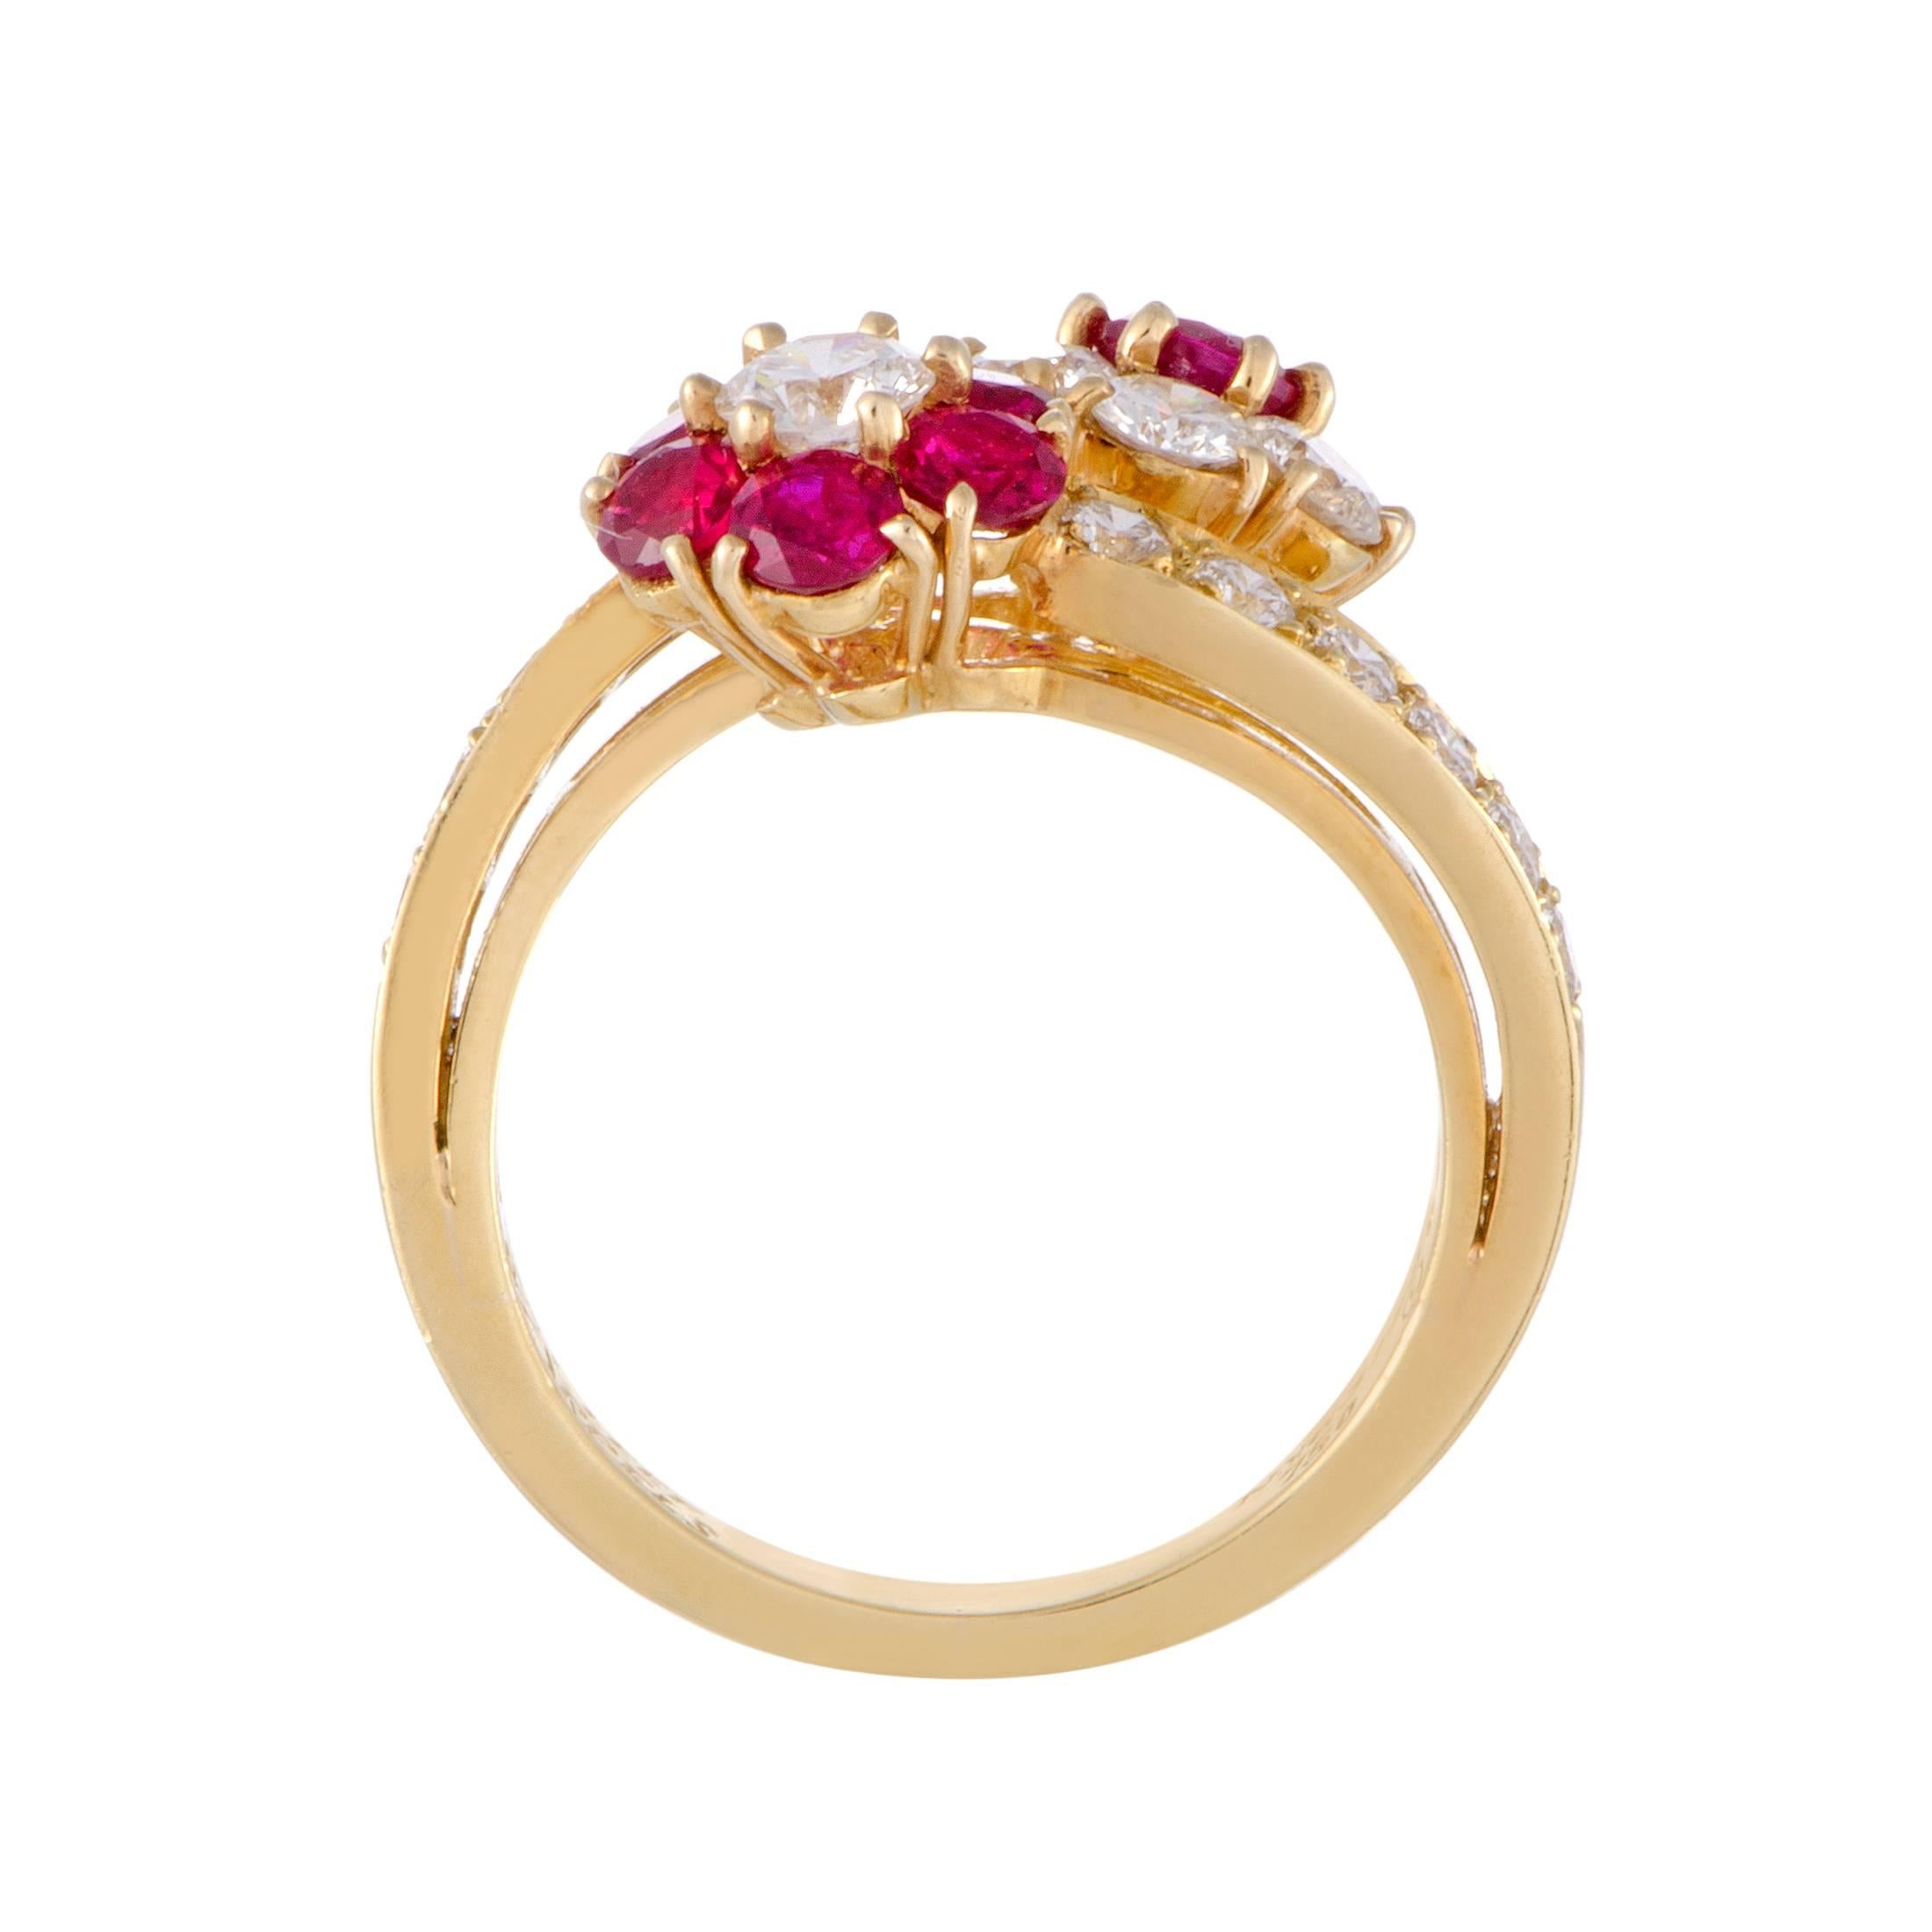 Fascinating E-color diamonds of VVS clarity weigh in total 1.35 carats and are complemented by romantic rubies totaling 1.00 carat in this enchanting ring from Van Cleef & Arpels where precious 18K yellow gold sets a gorgeously warm tone.
Ring